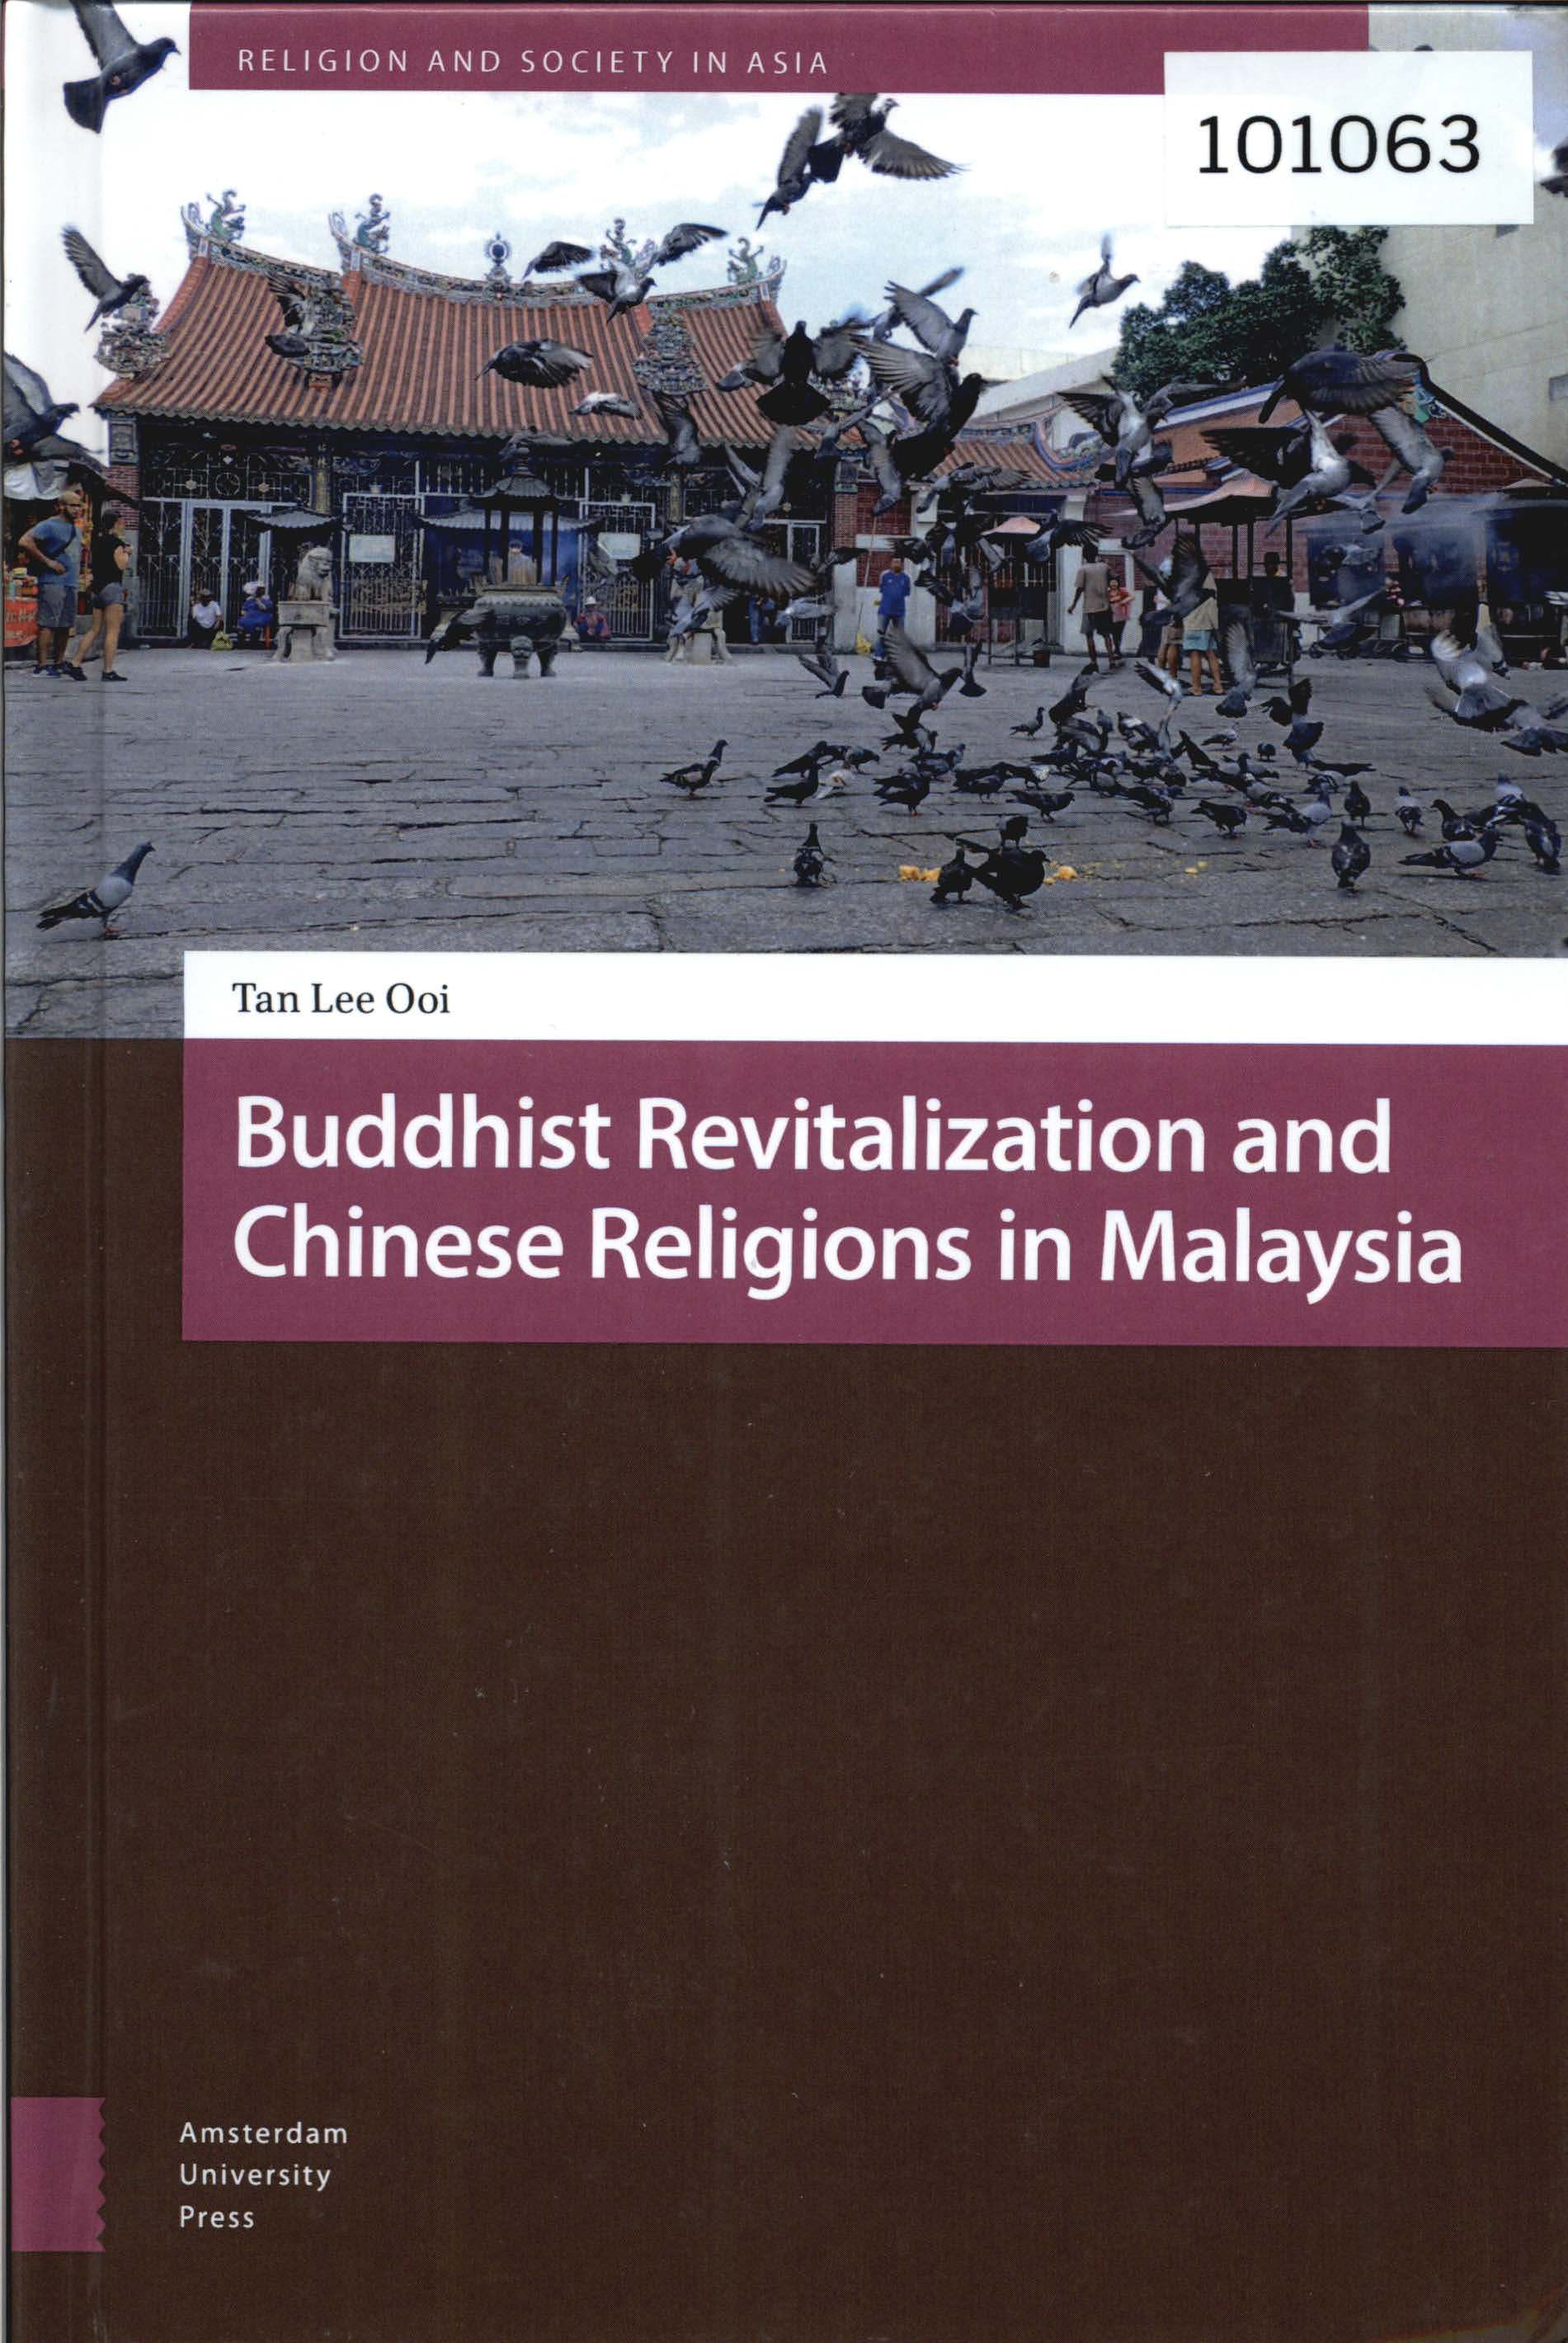 Buddhist Revitalization and Chinese Religions in Malaysia